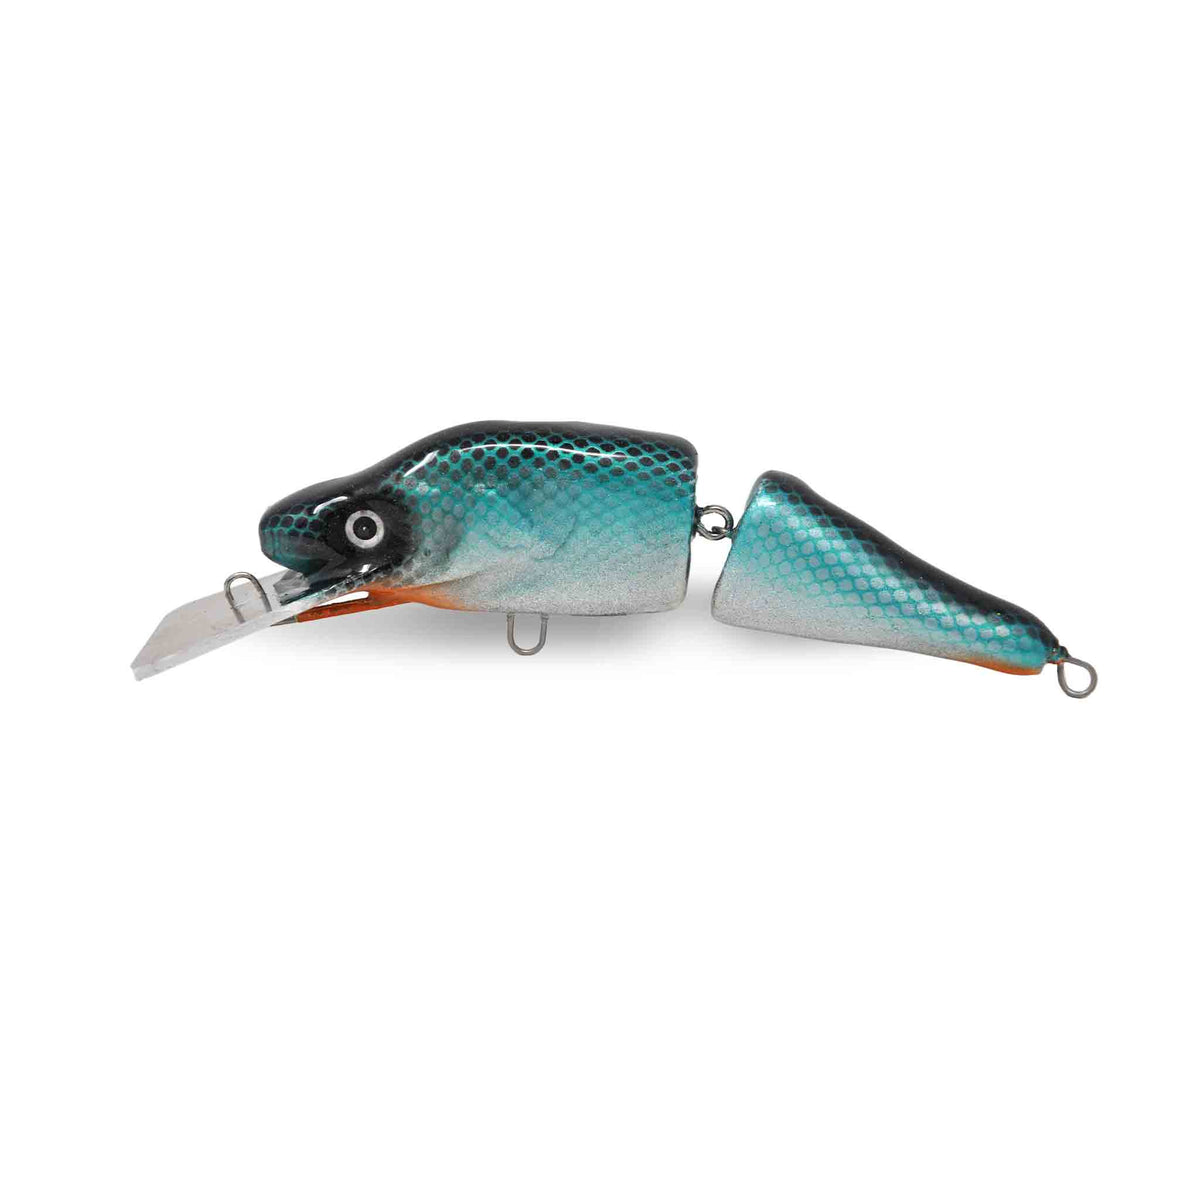 View of Crankbaits Scorpion MadPerch Jointed 7.5 Crankbait Shad available at EZOKO Pike and Musky Shop